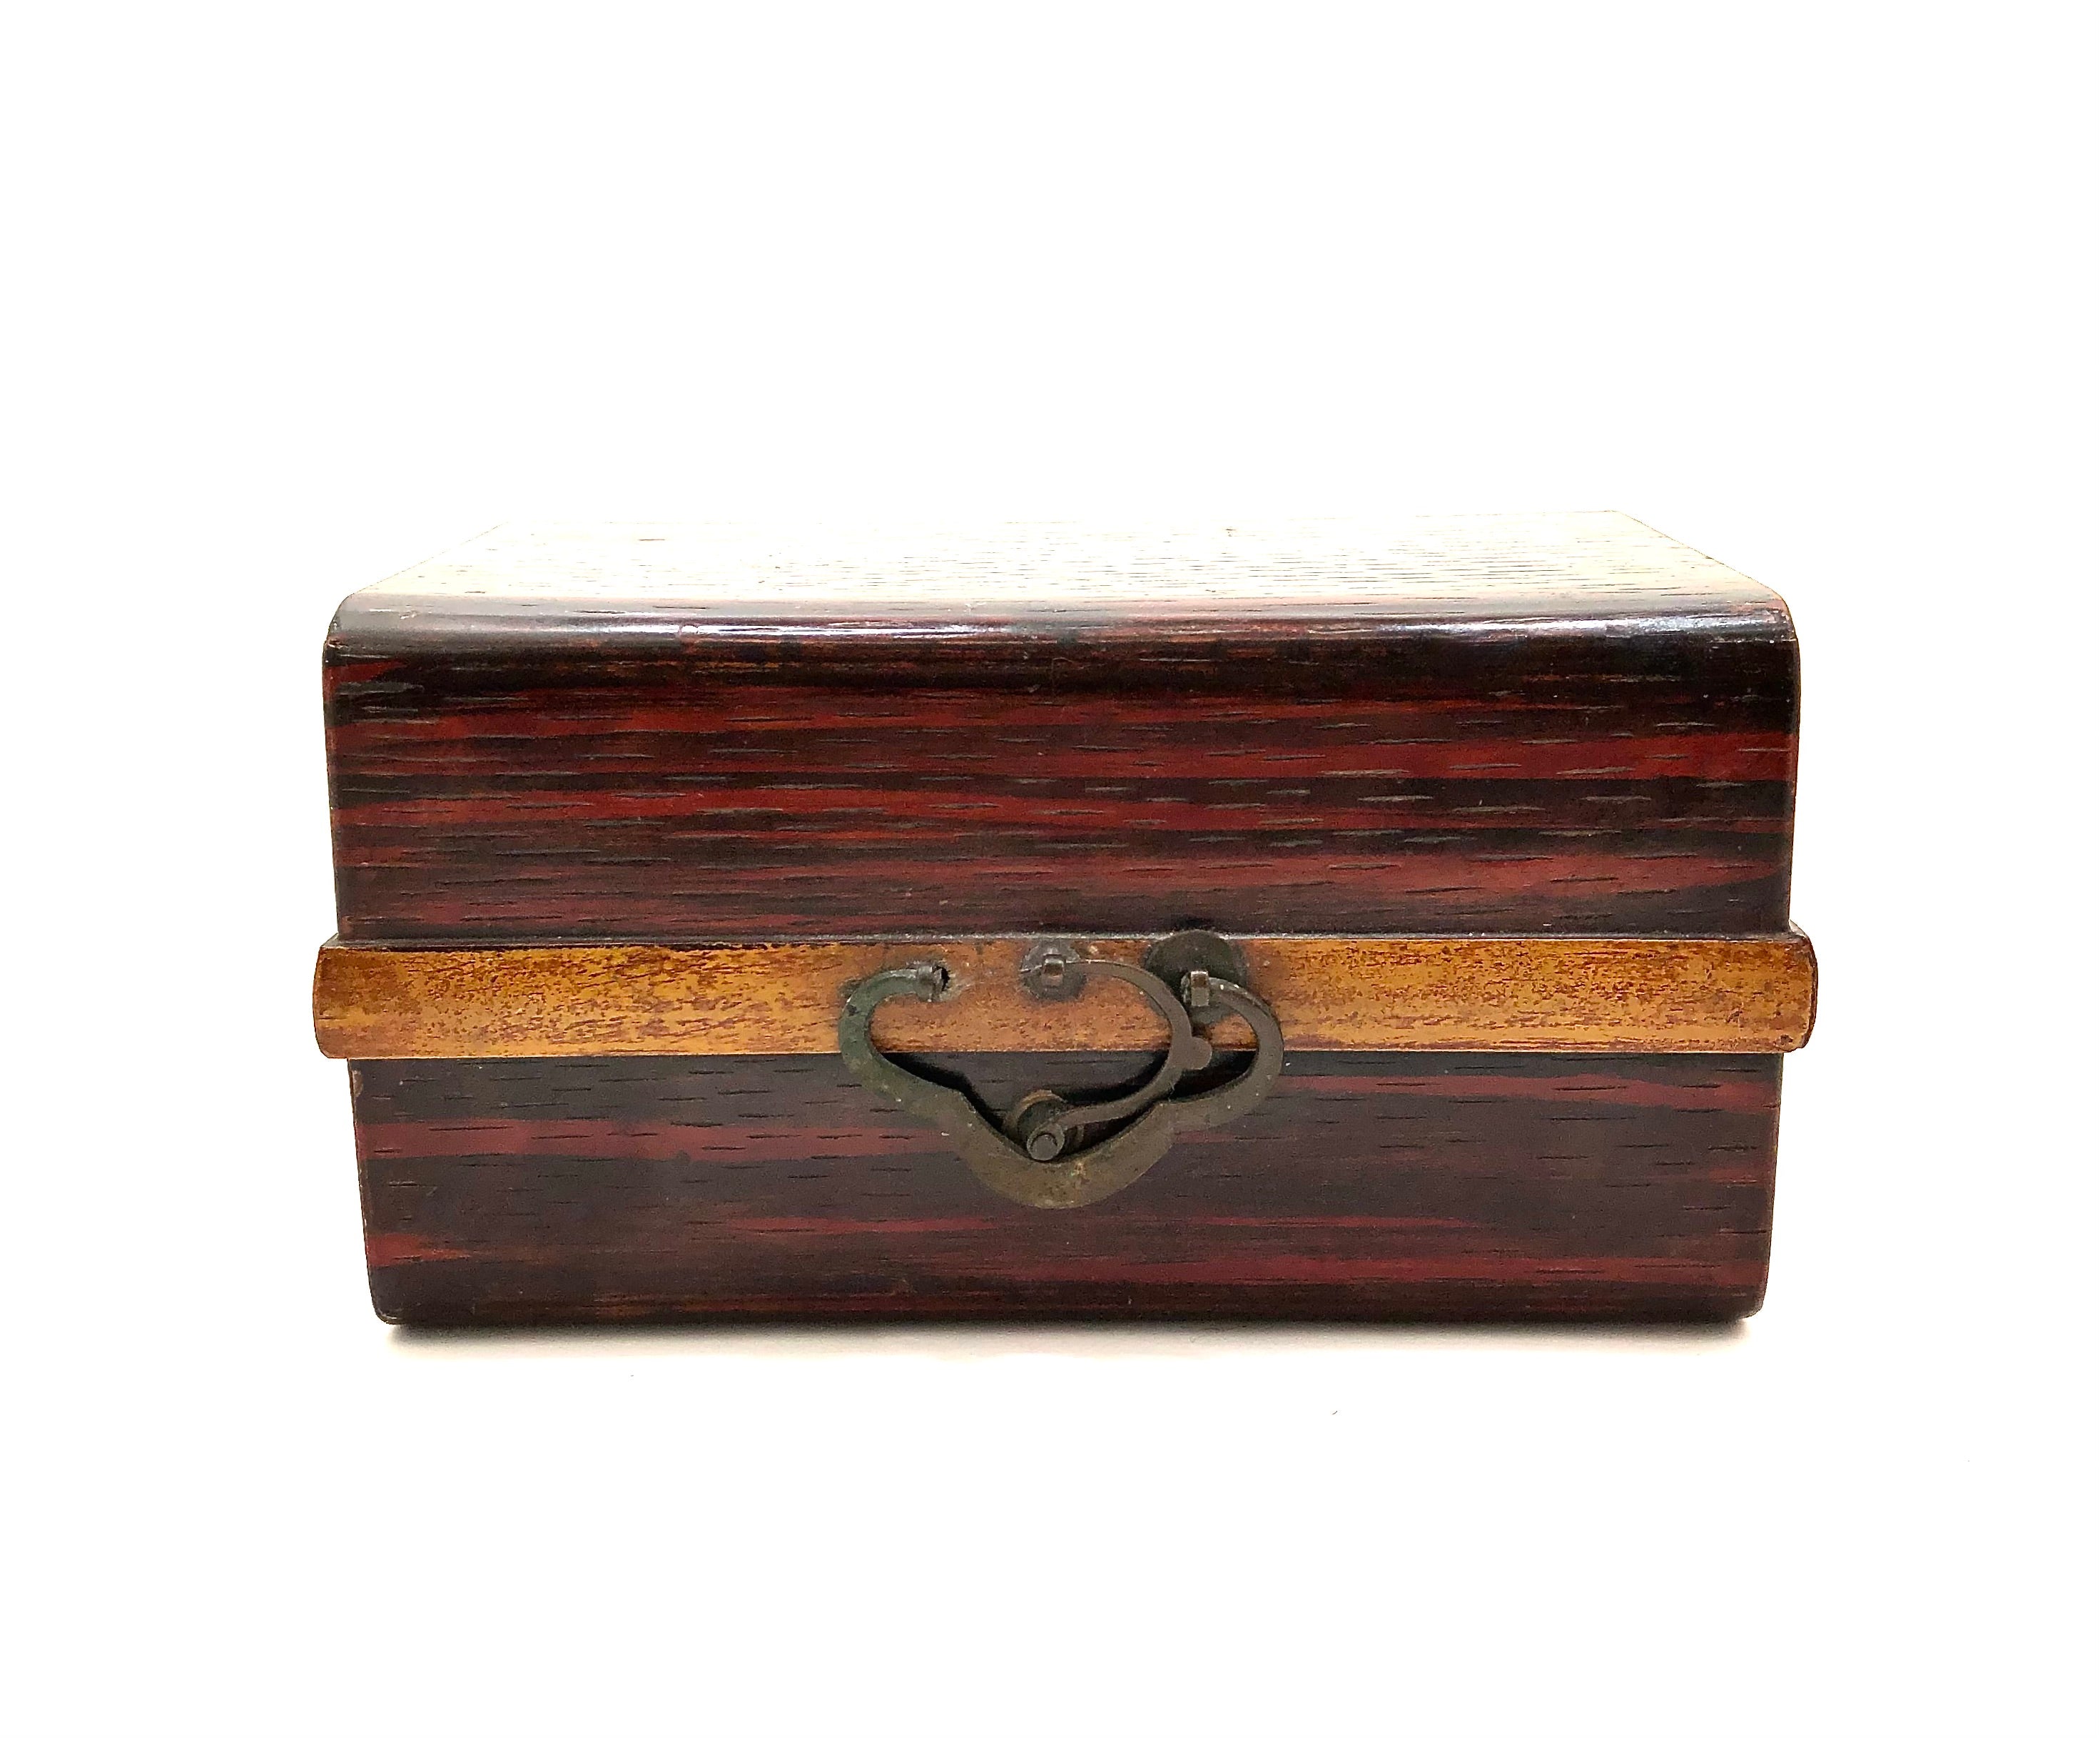 Japanese Antique Black Rosewood Writing Paper and Chop/Seal Organizer Box | Wood and Lacquer Craft